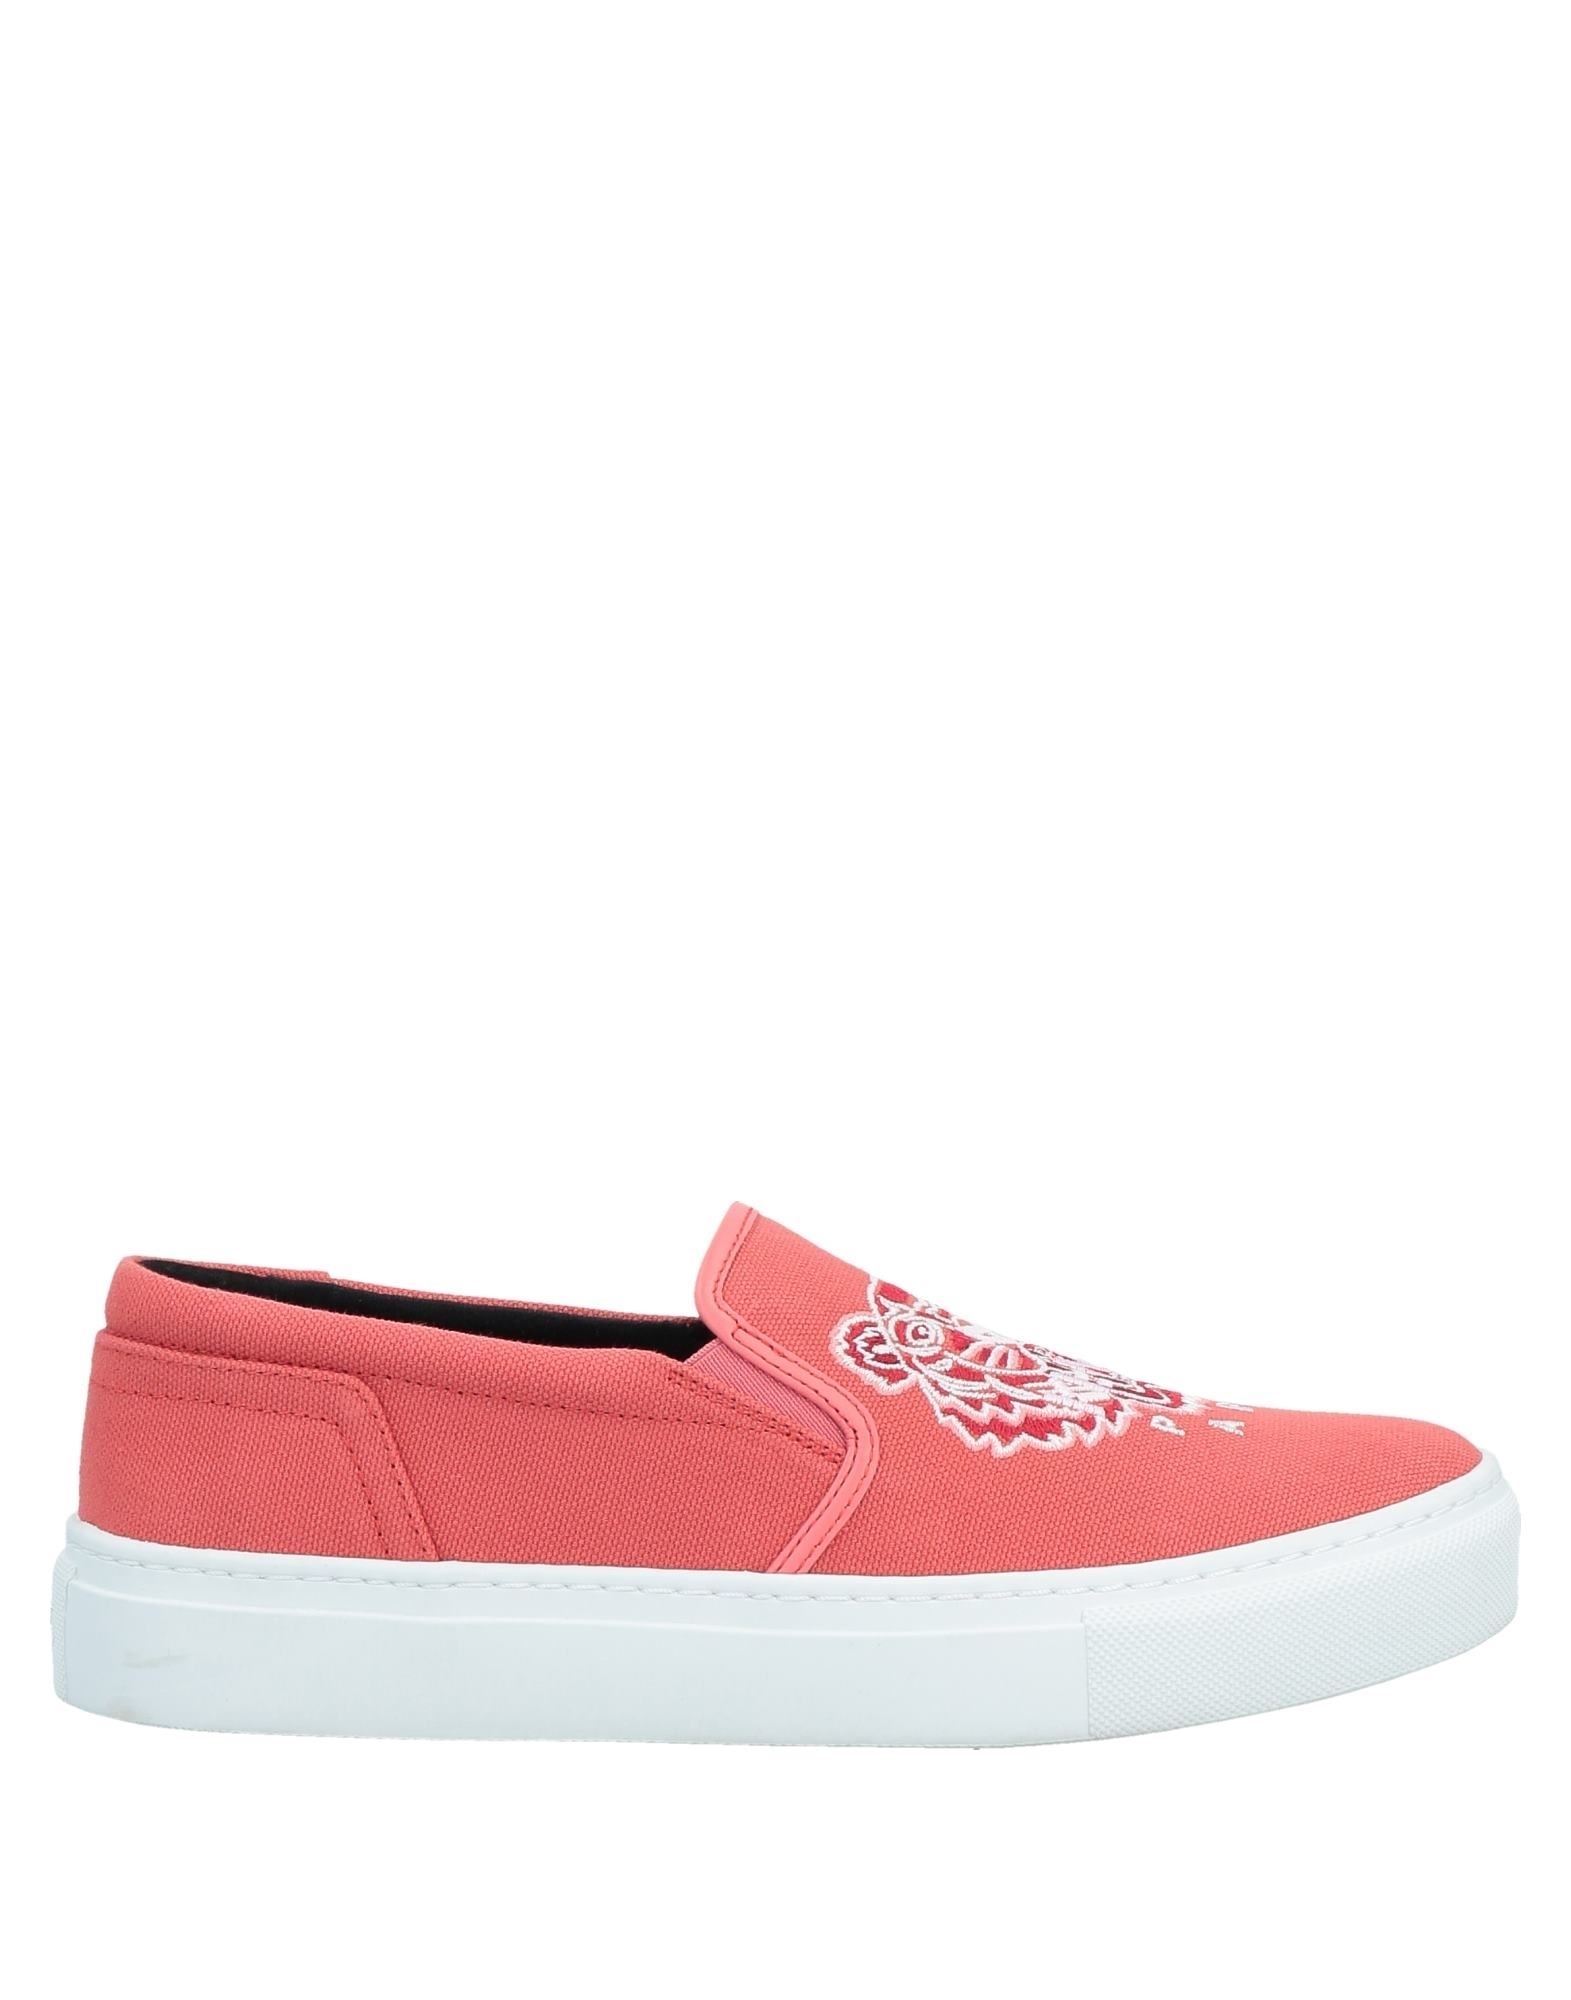 Kenzo Woman Sneakers Coral Size 10 Cotton In Red